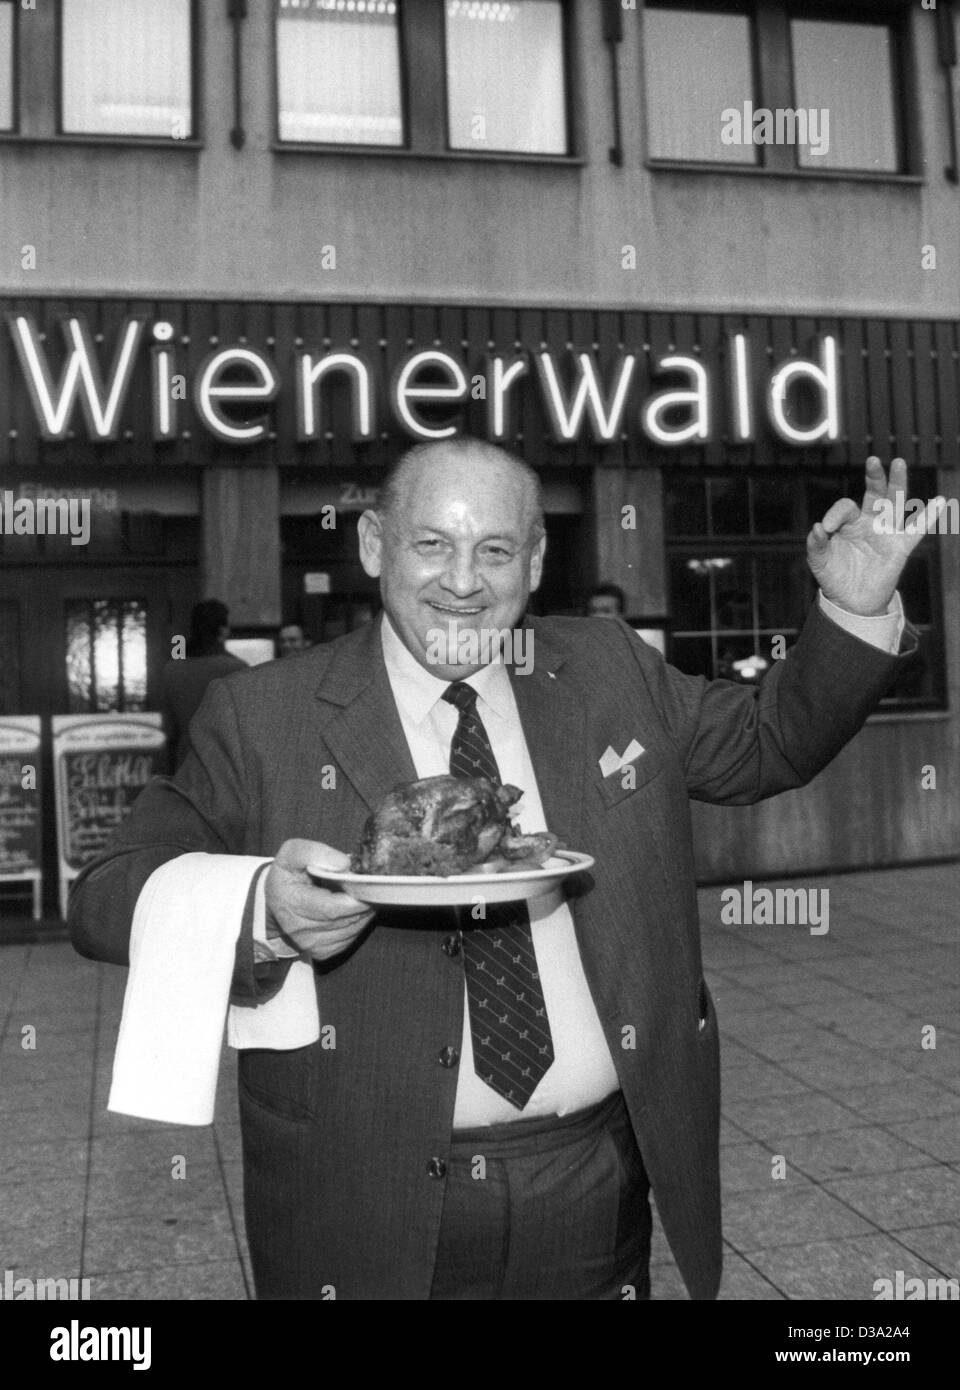 (dpa files) - The so called 'hendlkoenig' (chicken king) Friedrich Jahn acts as a waiter serving a fried chicken in front of one of his 'Wienerwald' chain restaurants, 16 February 1987. Stock Photo